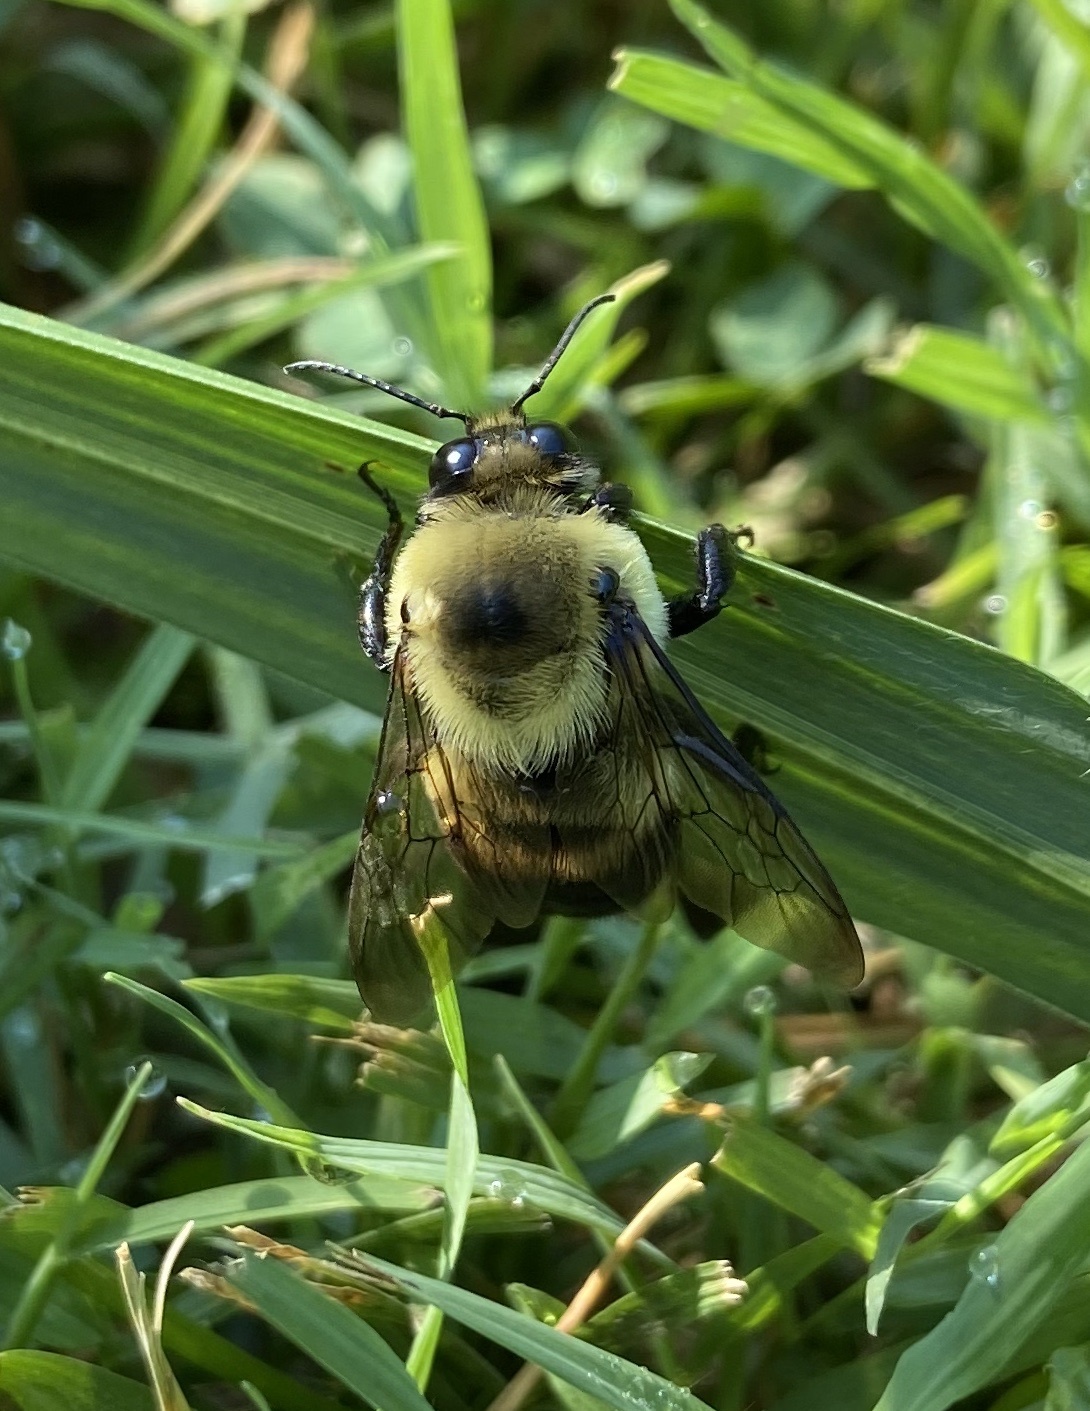 EXT XEN.0011 Midwest Bumble Bee Identification, Ecology, and